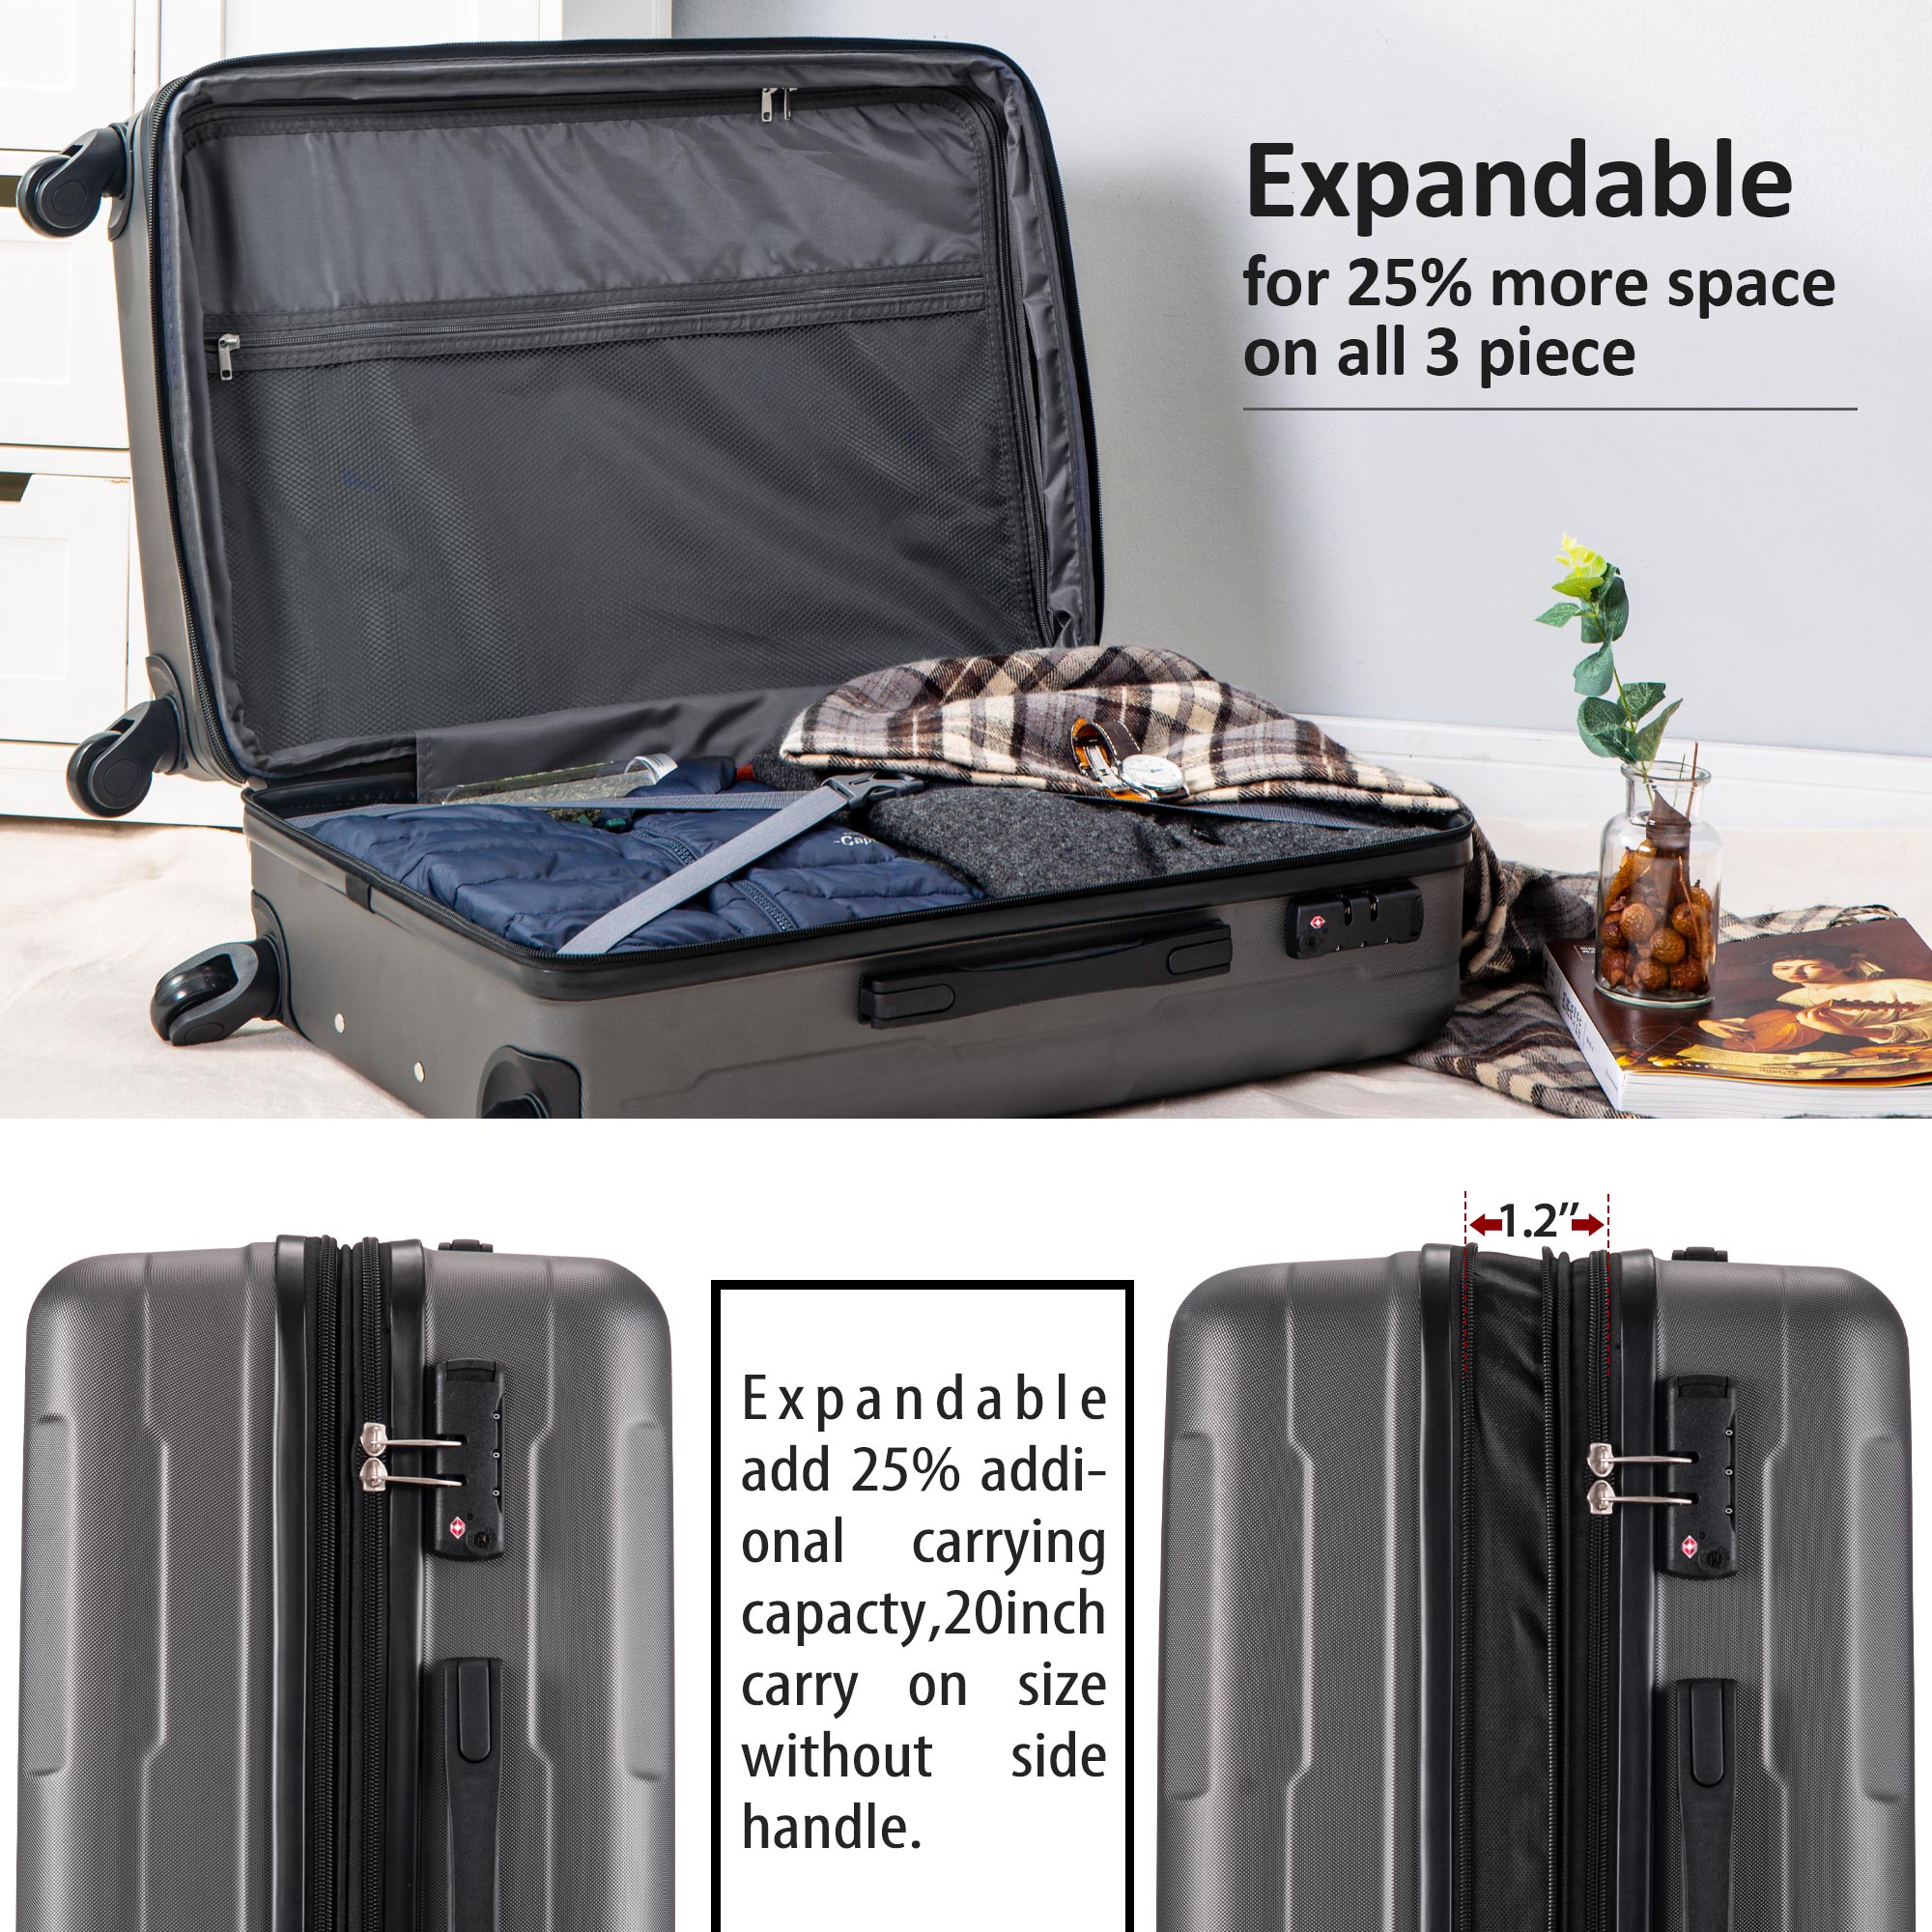 3-in-1 Portable Suitcase Sets with 4-Wheel, Lightweight Hardside Expandable Luggage with TSA Lock, Heavyweight Carry on Suitcase Set: 20"/ 24''/ 28", Large Capacity Storage for Traveling, Black, S6654 - image 2 of 8